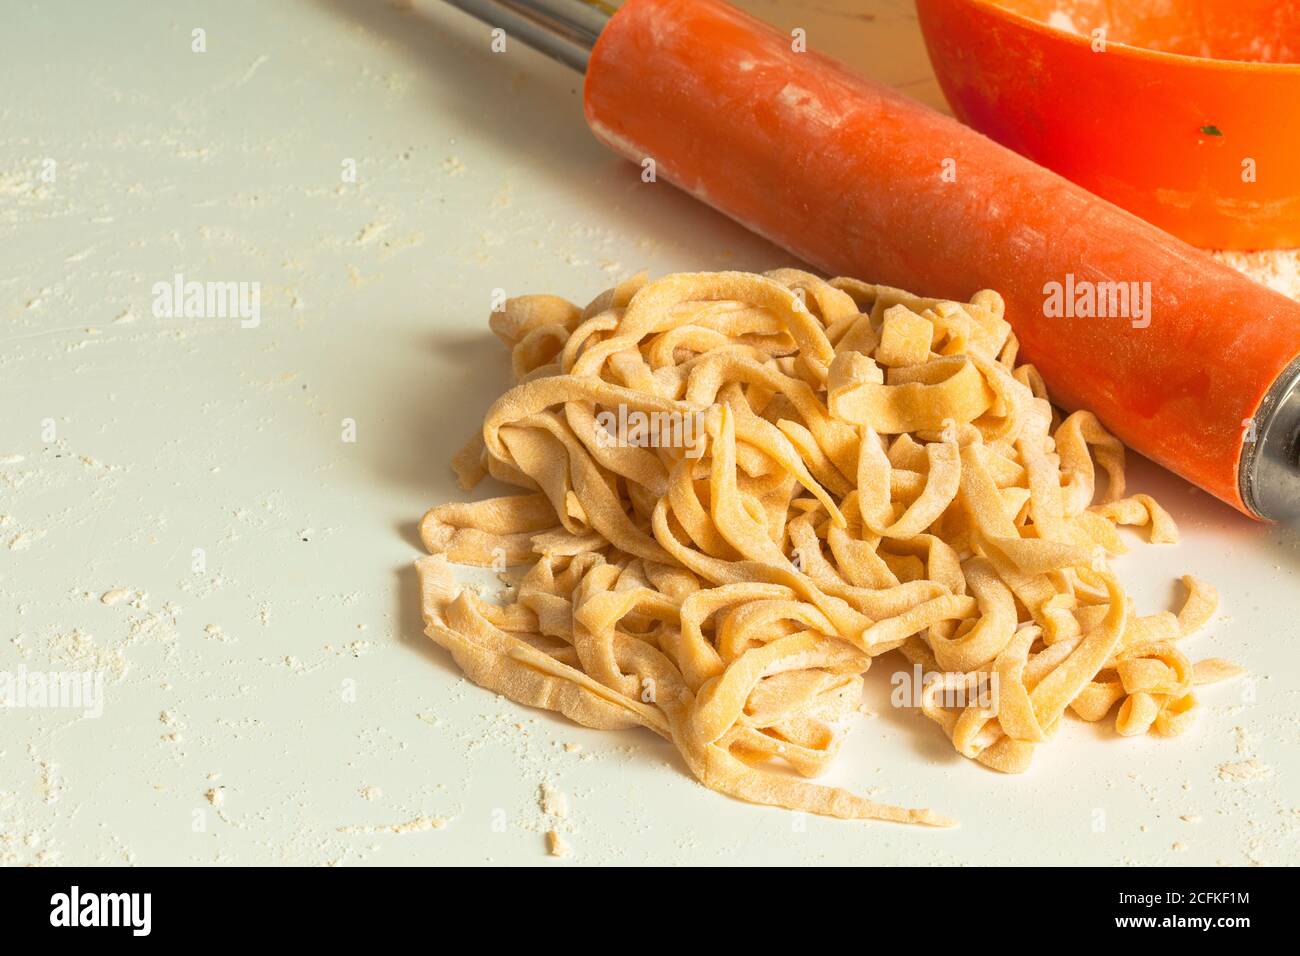 home cooking - making italian pasta from dough Stock Photo